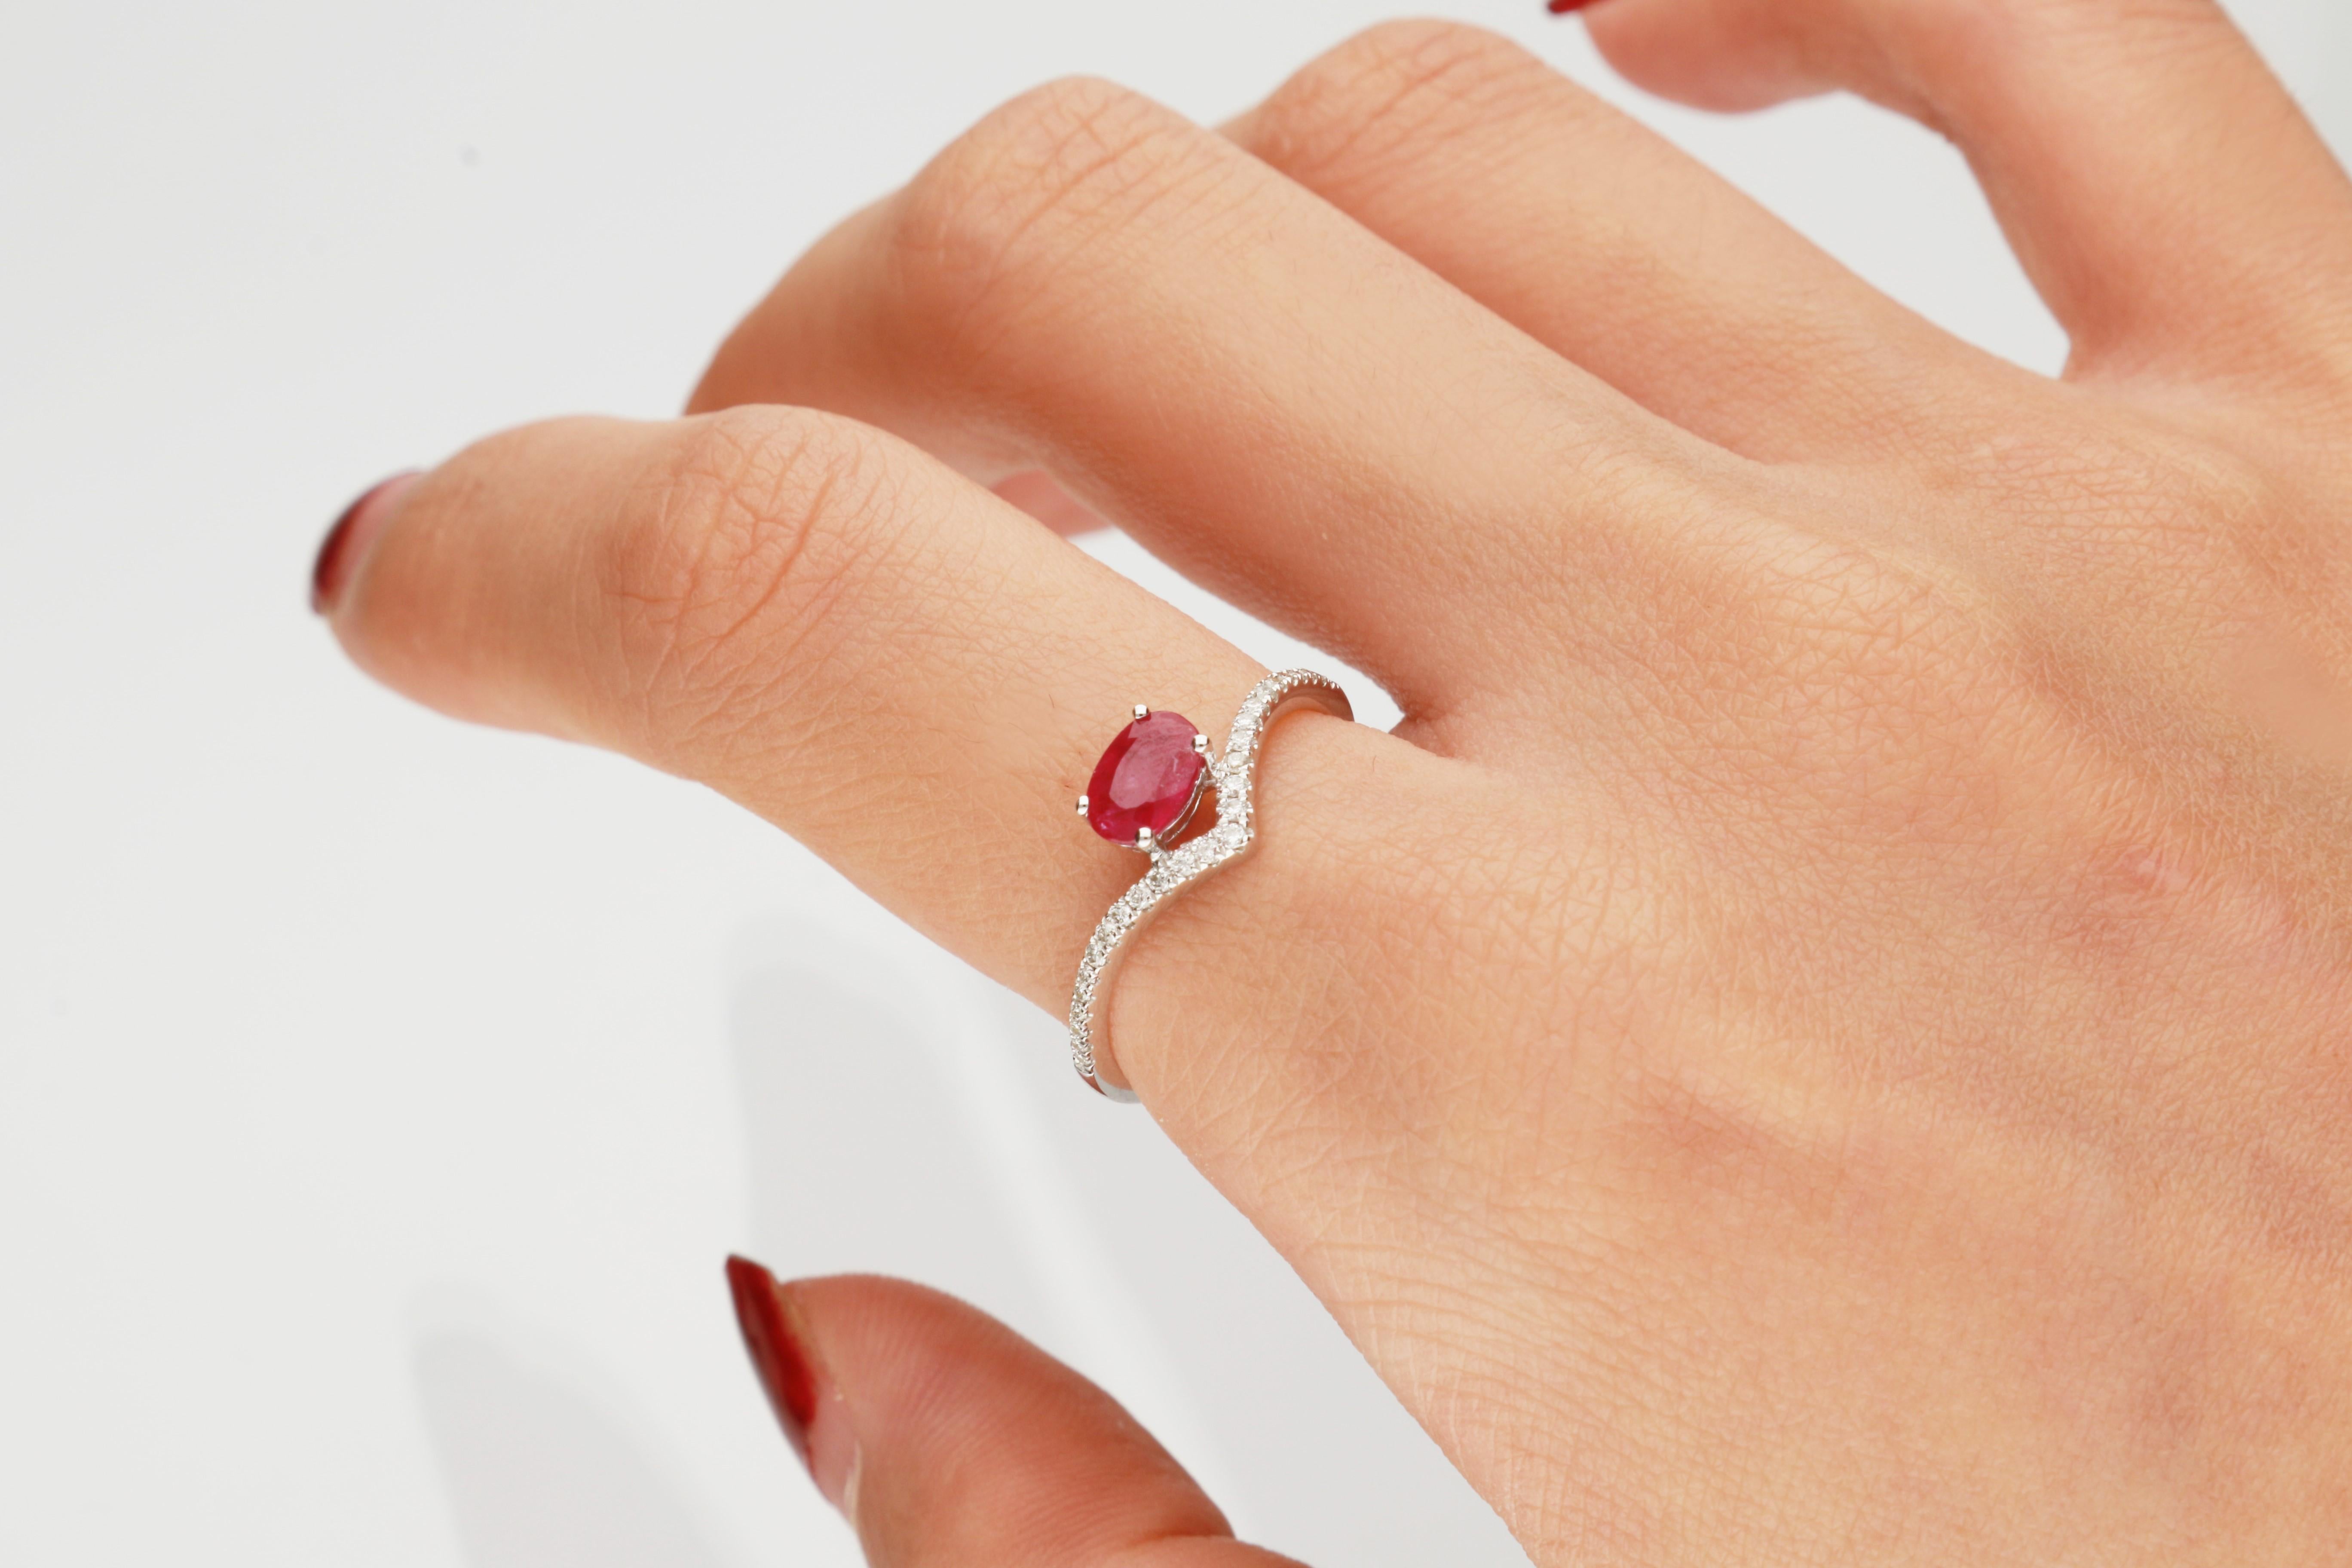 Stunning, timeless and classy eternity Unique Ring. Decorate yourself in luxury with this Gin & Grace Ring. The 14K White Gold jewelry boasts with Oval-cut 1 pcs 0.57 carat Ruby and Natural Round-cut white Diamond (27 Pcs) 0.10 Carat accent stones